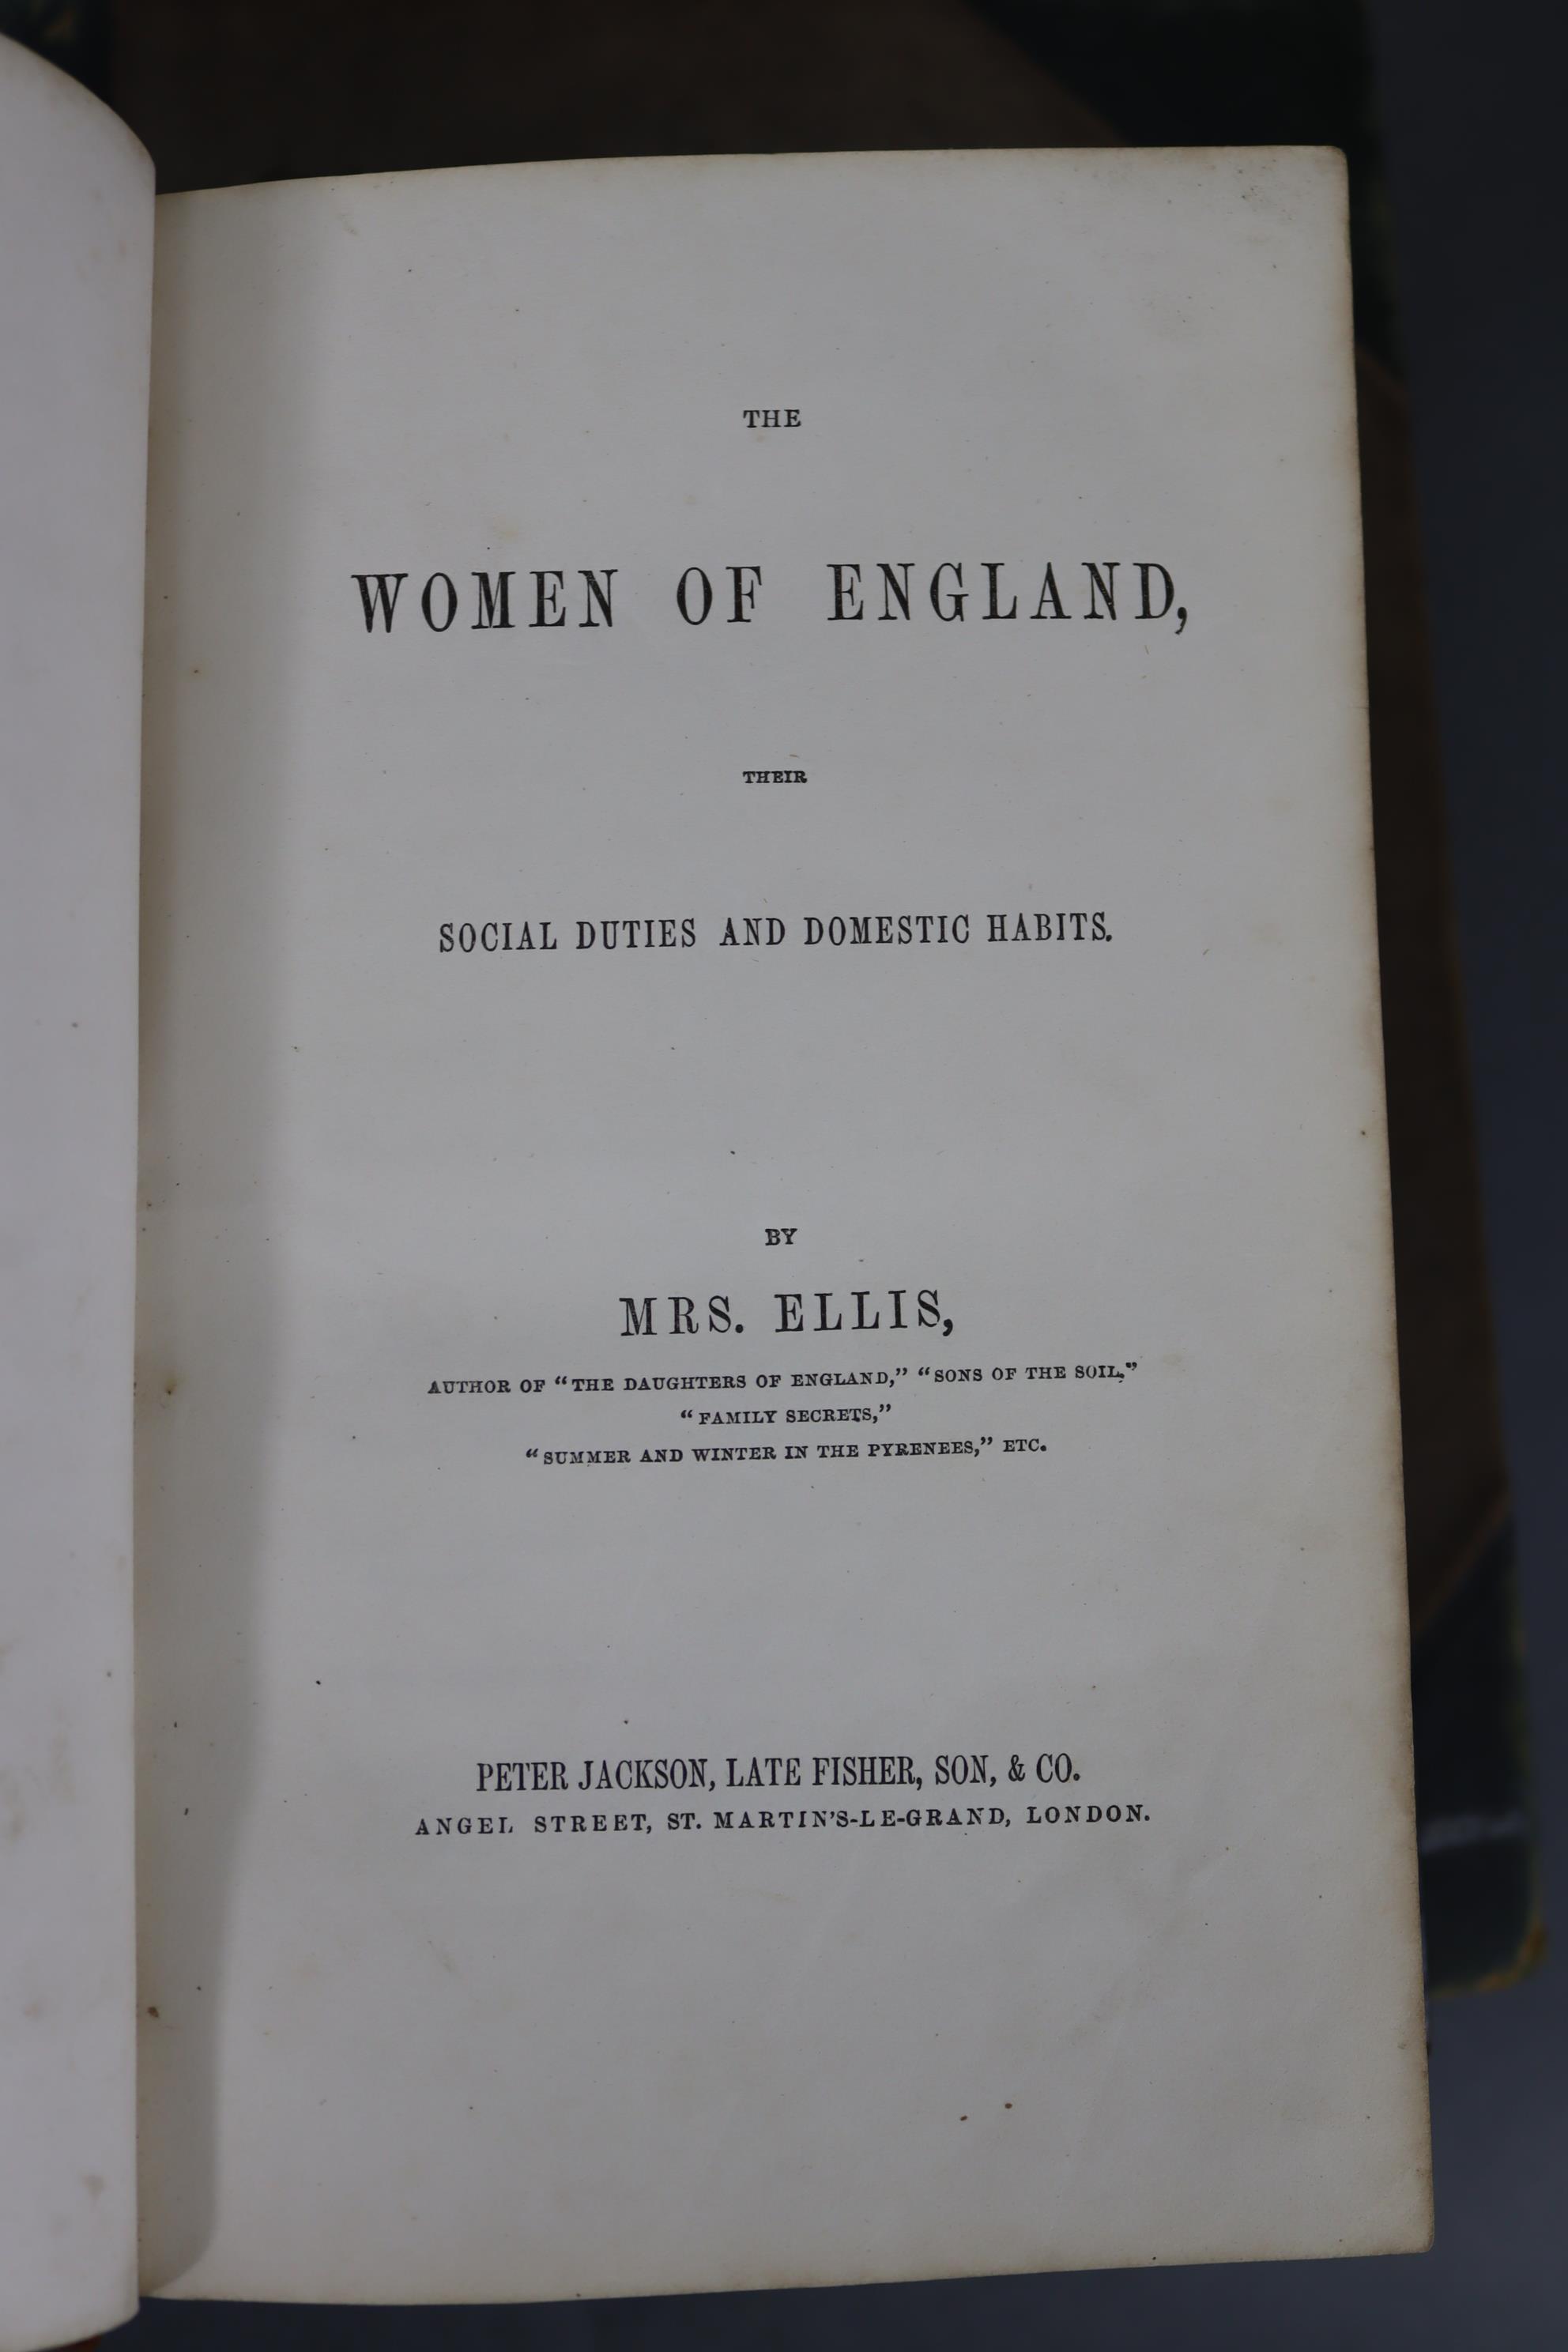 Two 19th century leather-bound volumes by Mrs Ellis “The Daughters of England” & “The Women of - Image 17 of 22